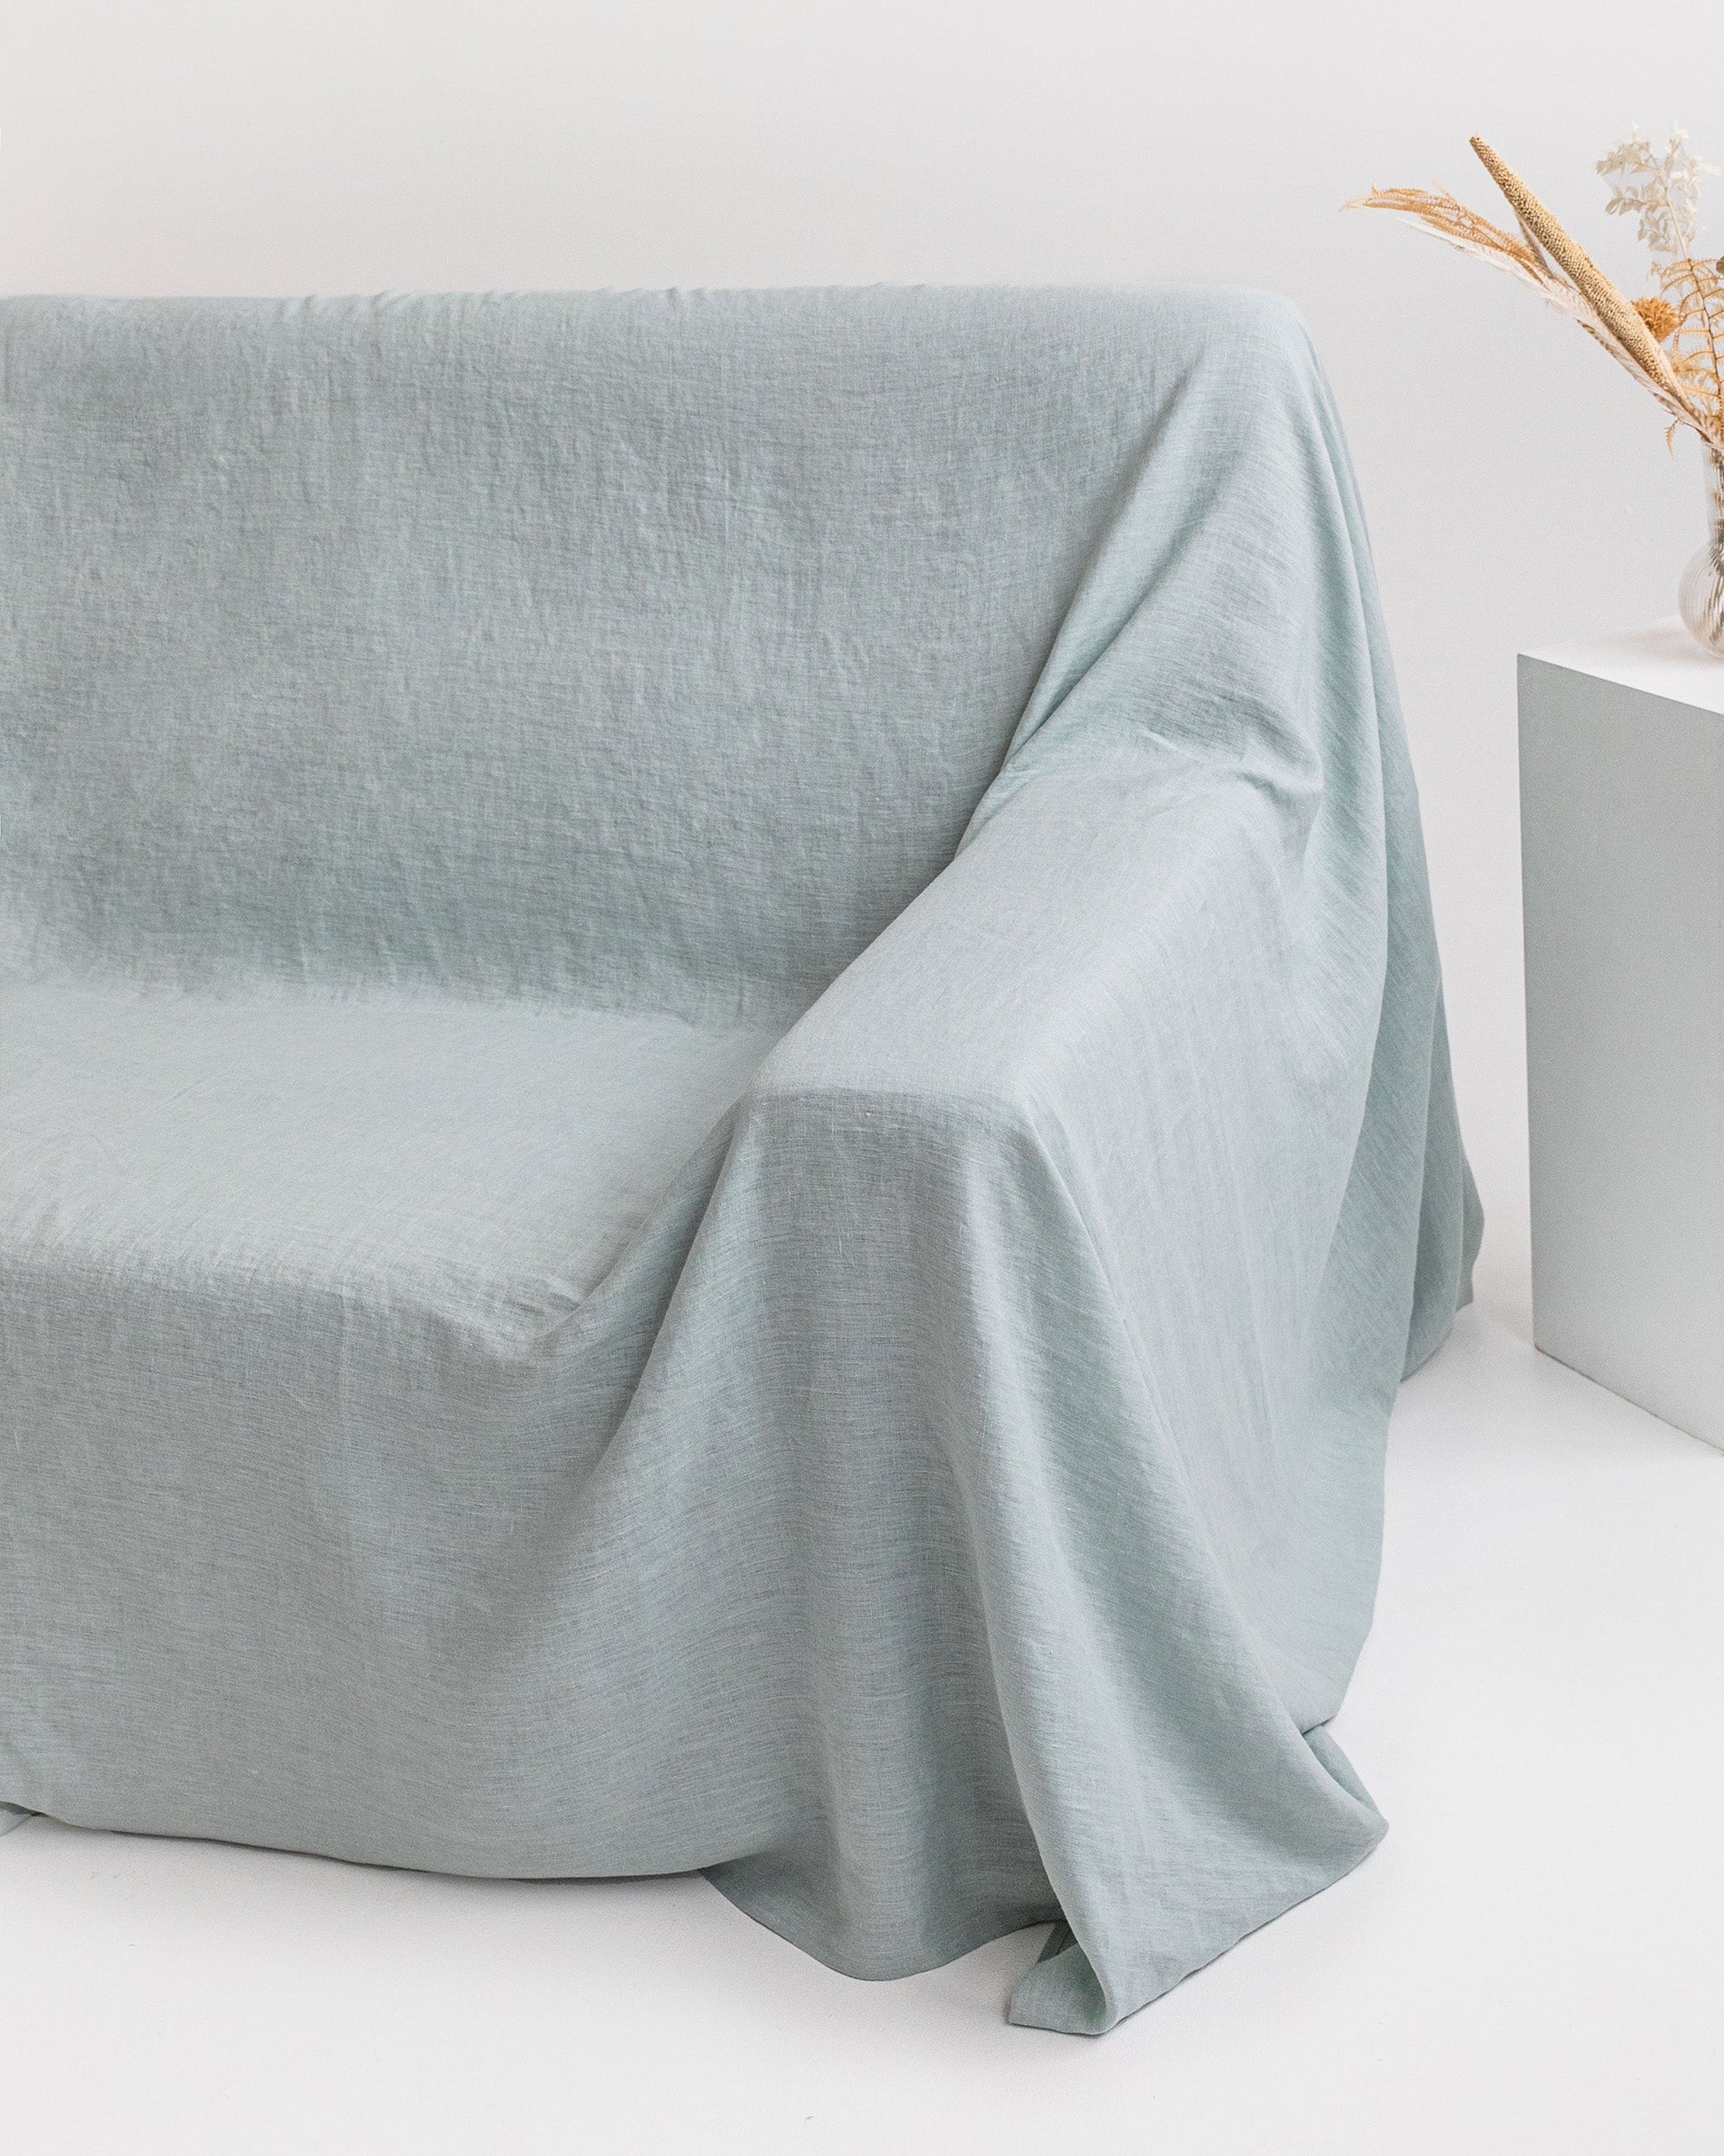 Custom size linen couch cover in Dusty blue - MagicLinen